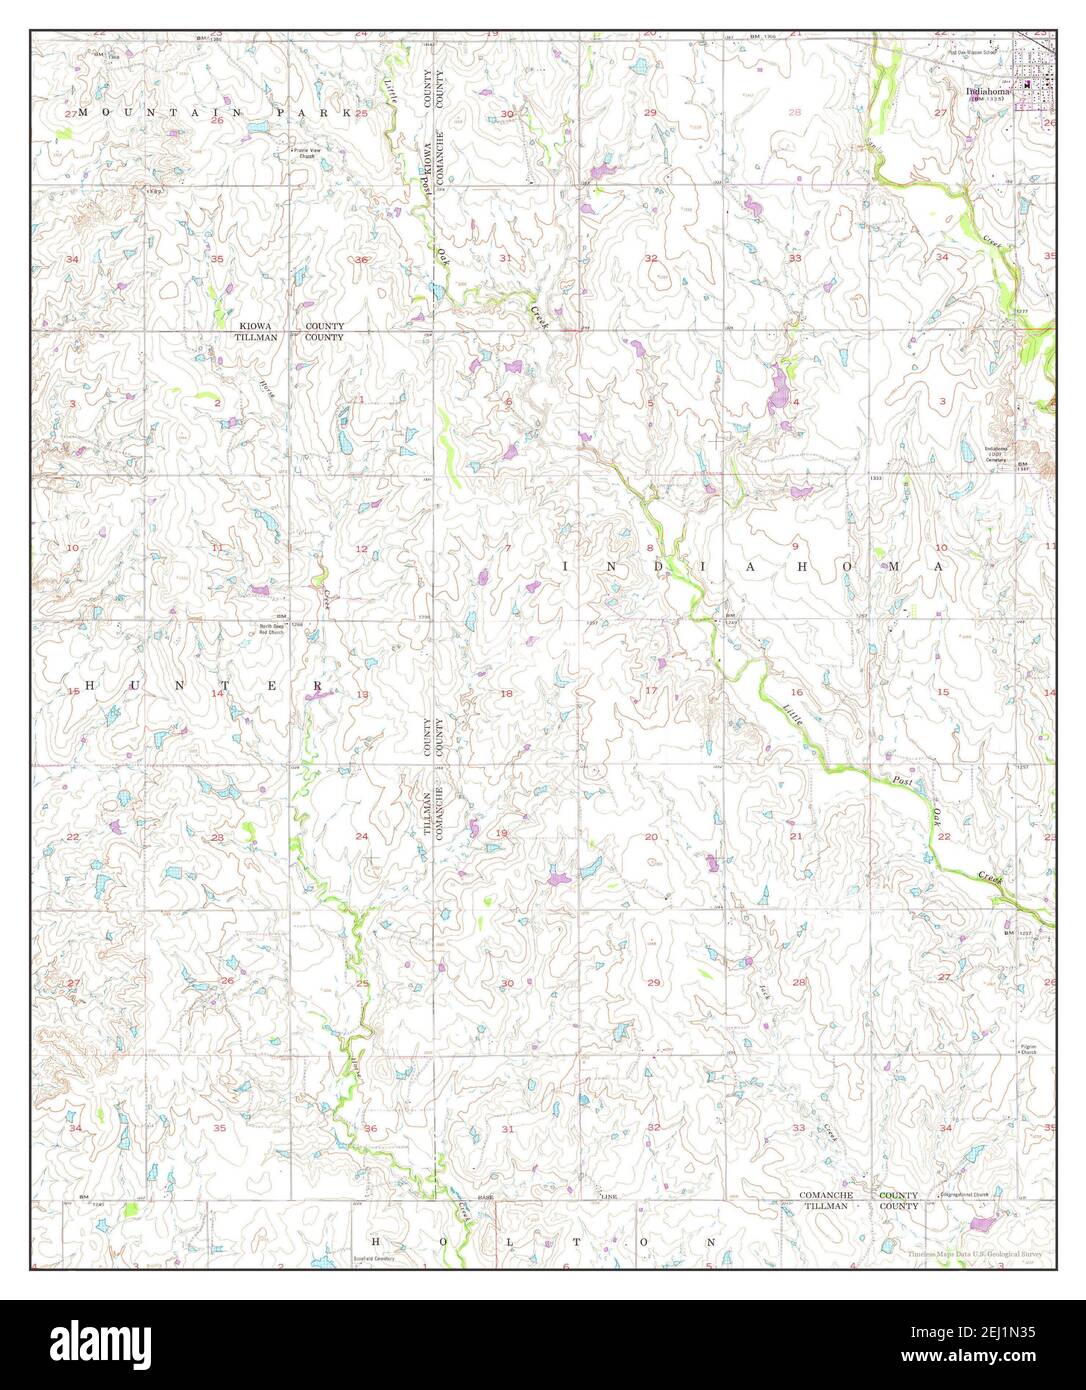 Indiahoma, Oklahoma, map 1956, 1:24000, United States of America by Timeless Maps, data U.S. Geological Survey Foto Stock